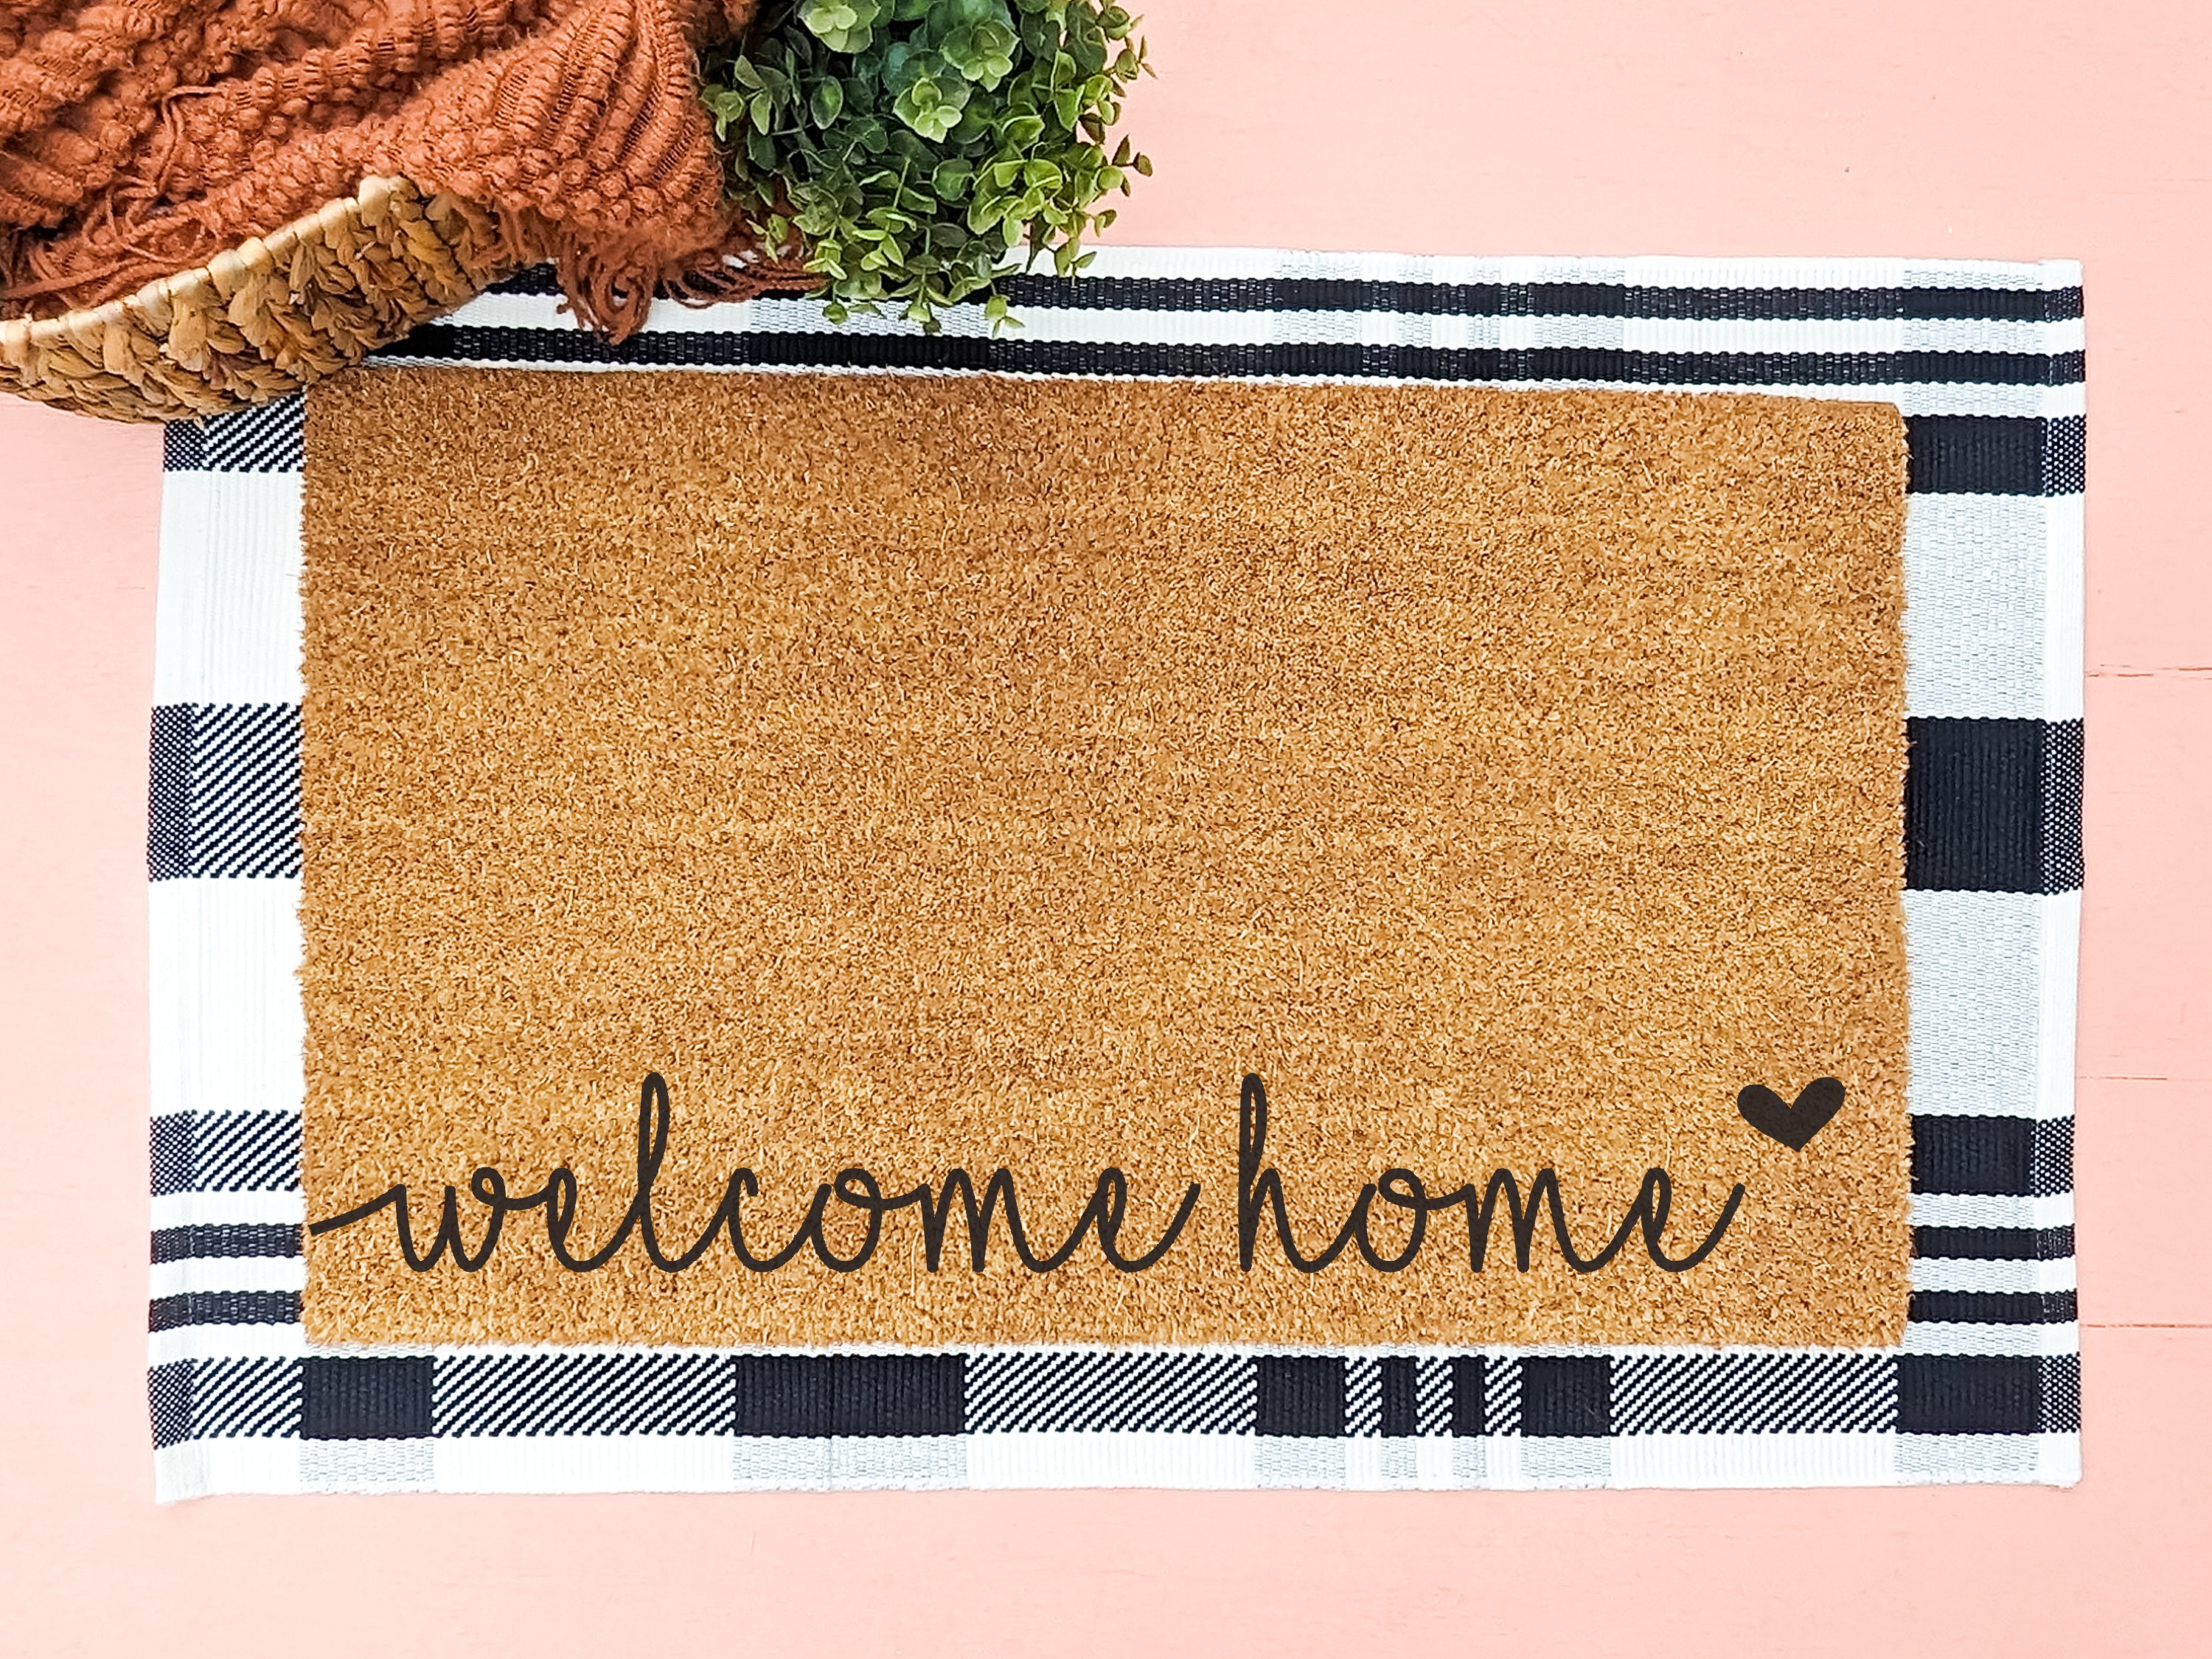 Home Themed Picture Mats For Scrapbooking: Welcome Home - Creative